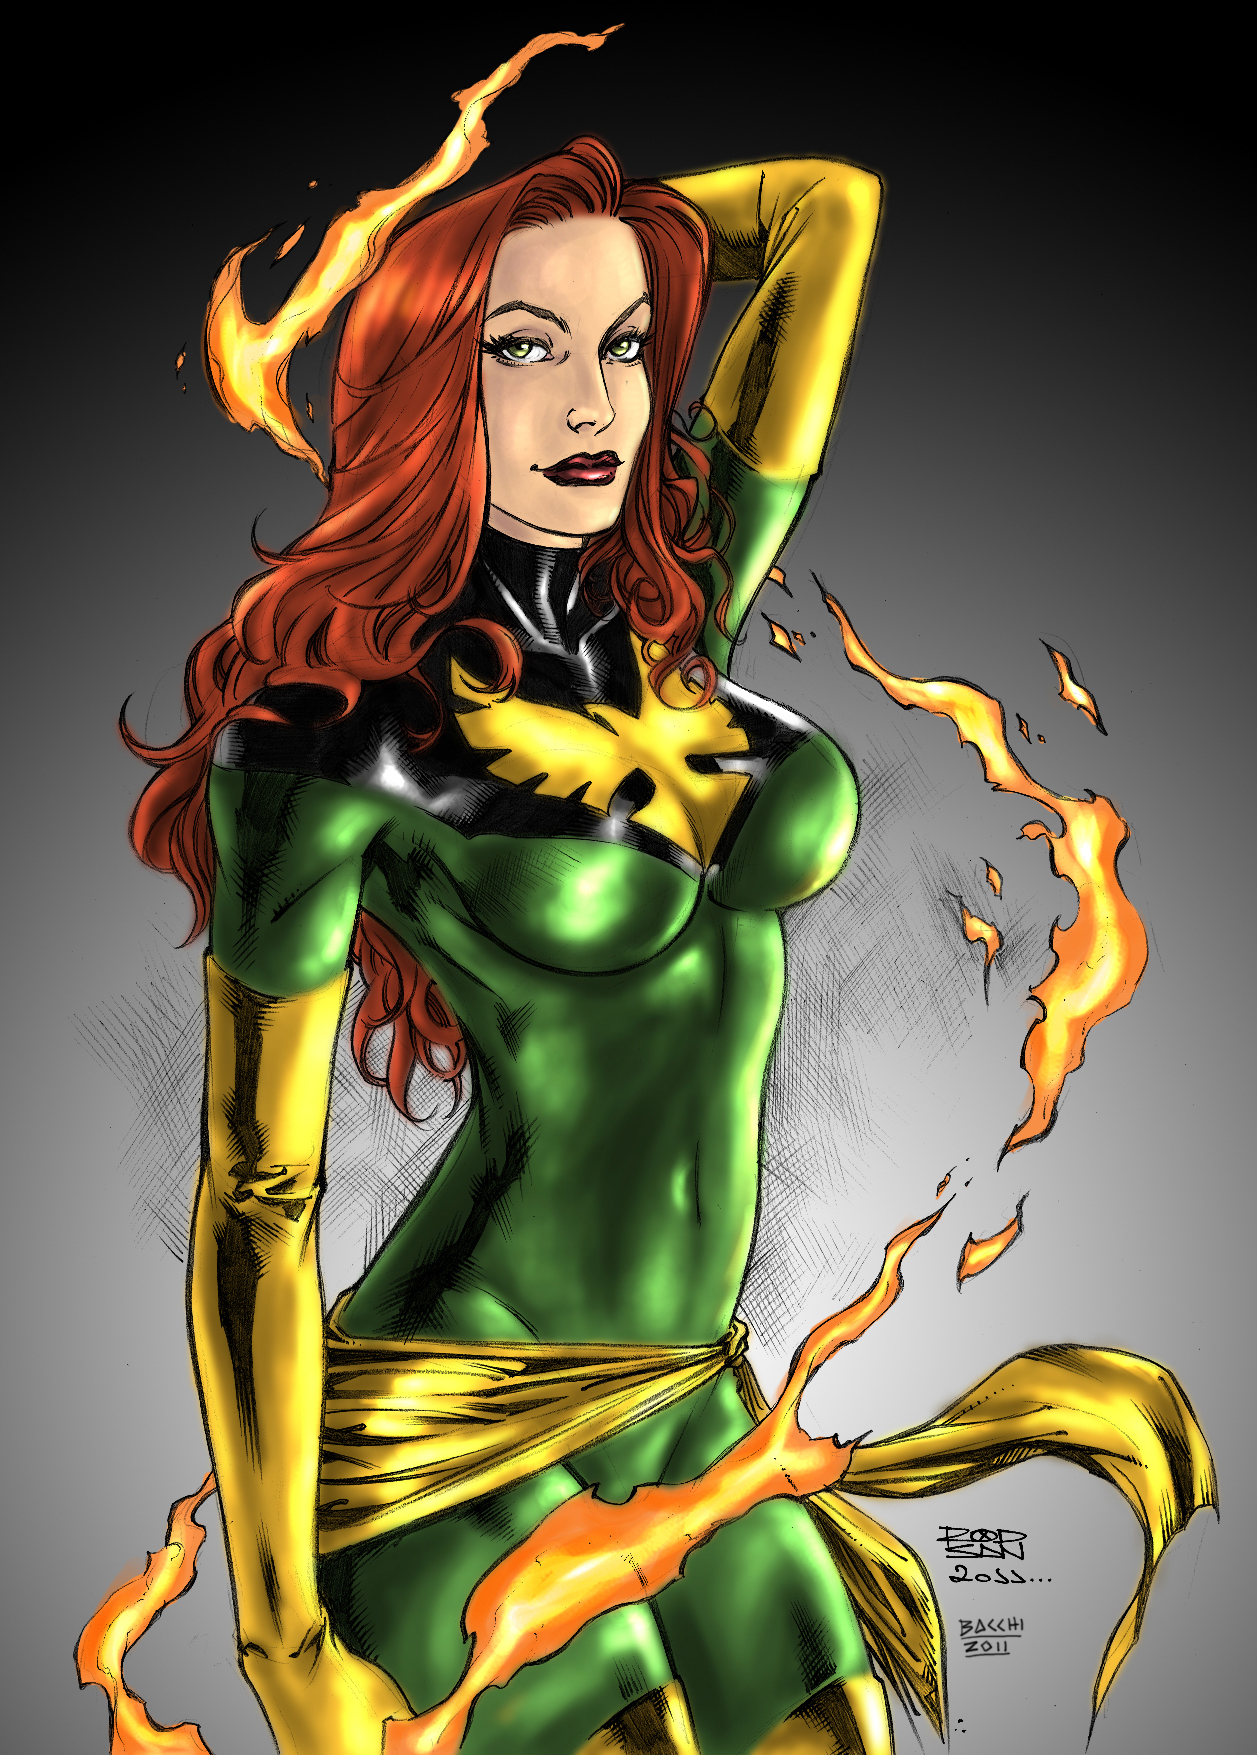 jean grey, images, image, wallpaper, photos, photo, photograph, gallery, ph...